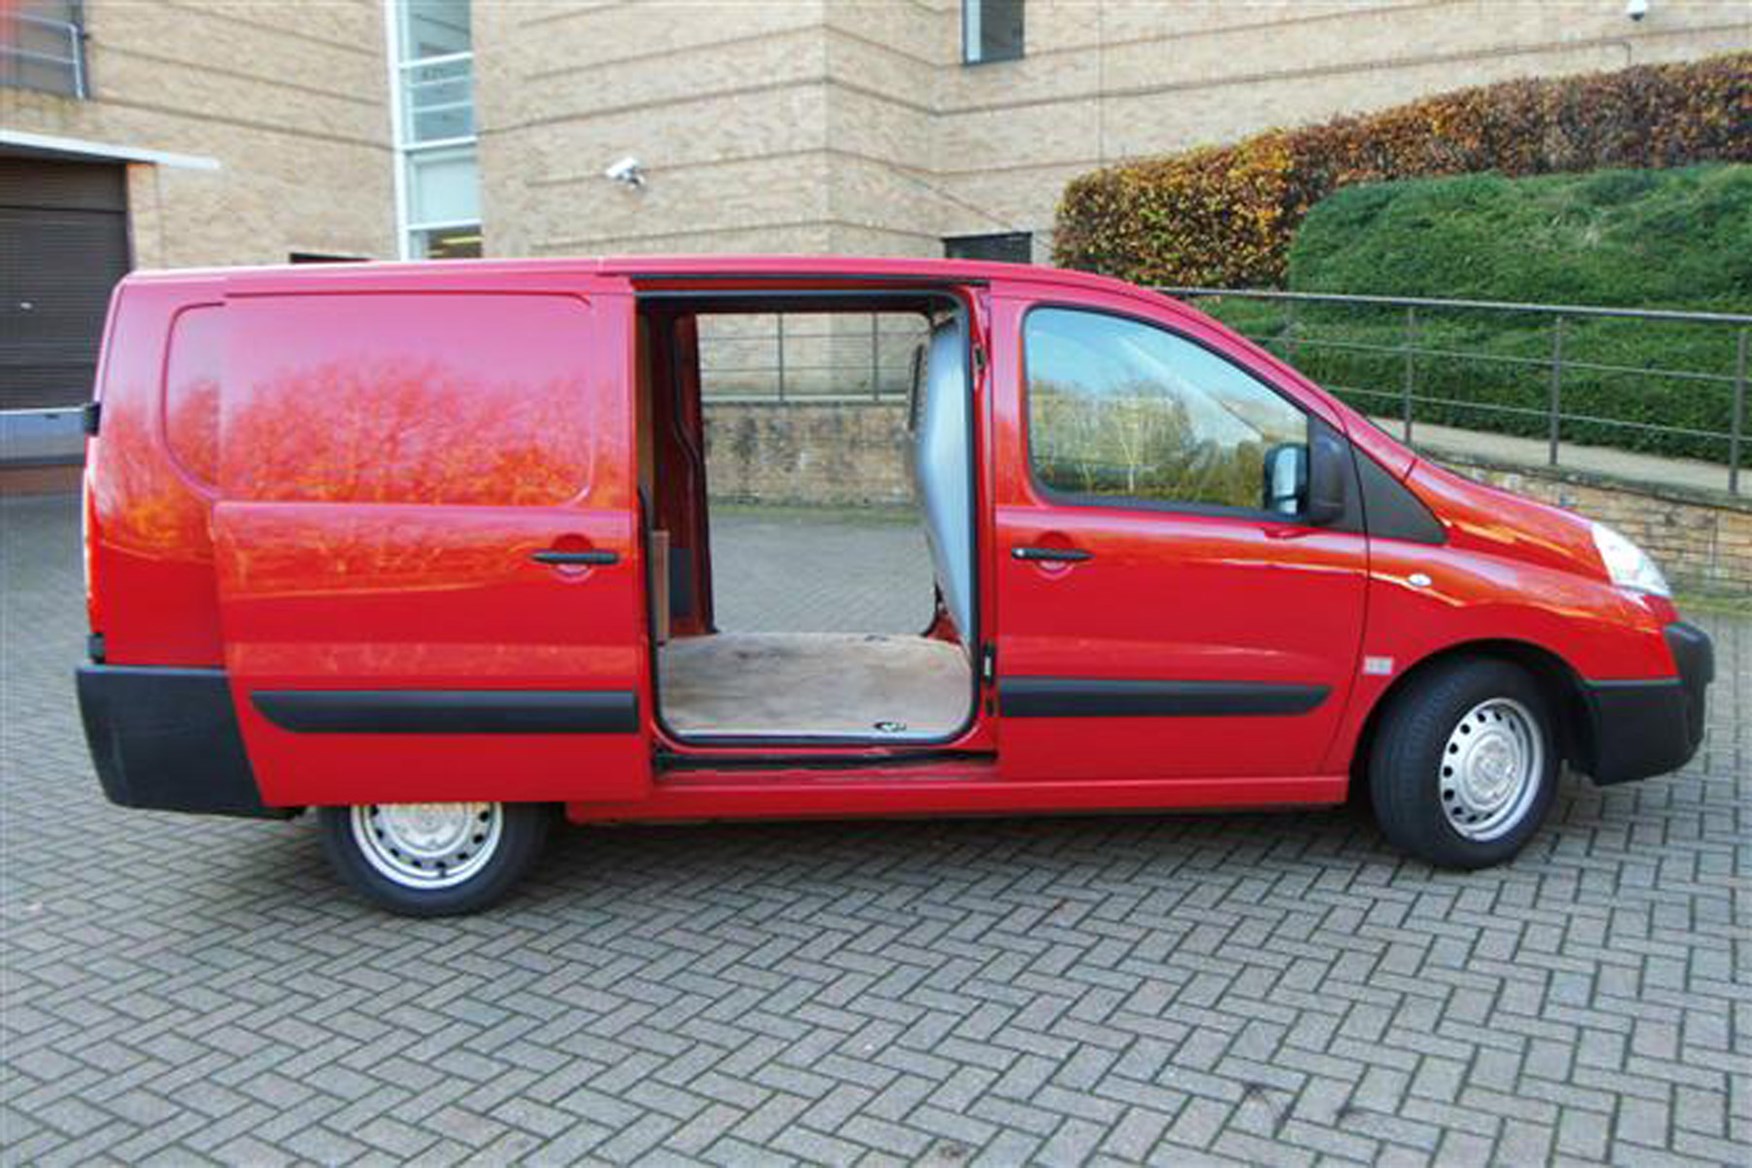 Toyota Proace review on Parkers Vans - load area access